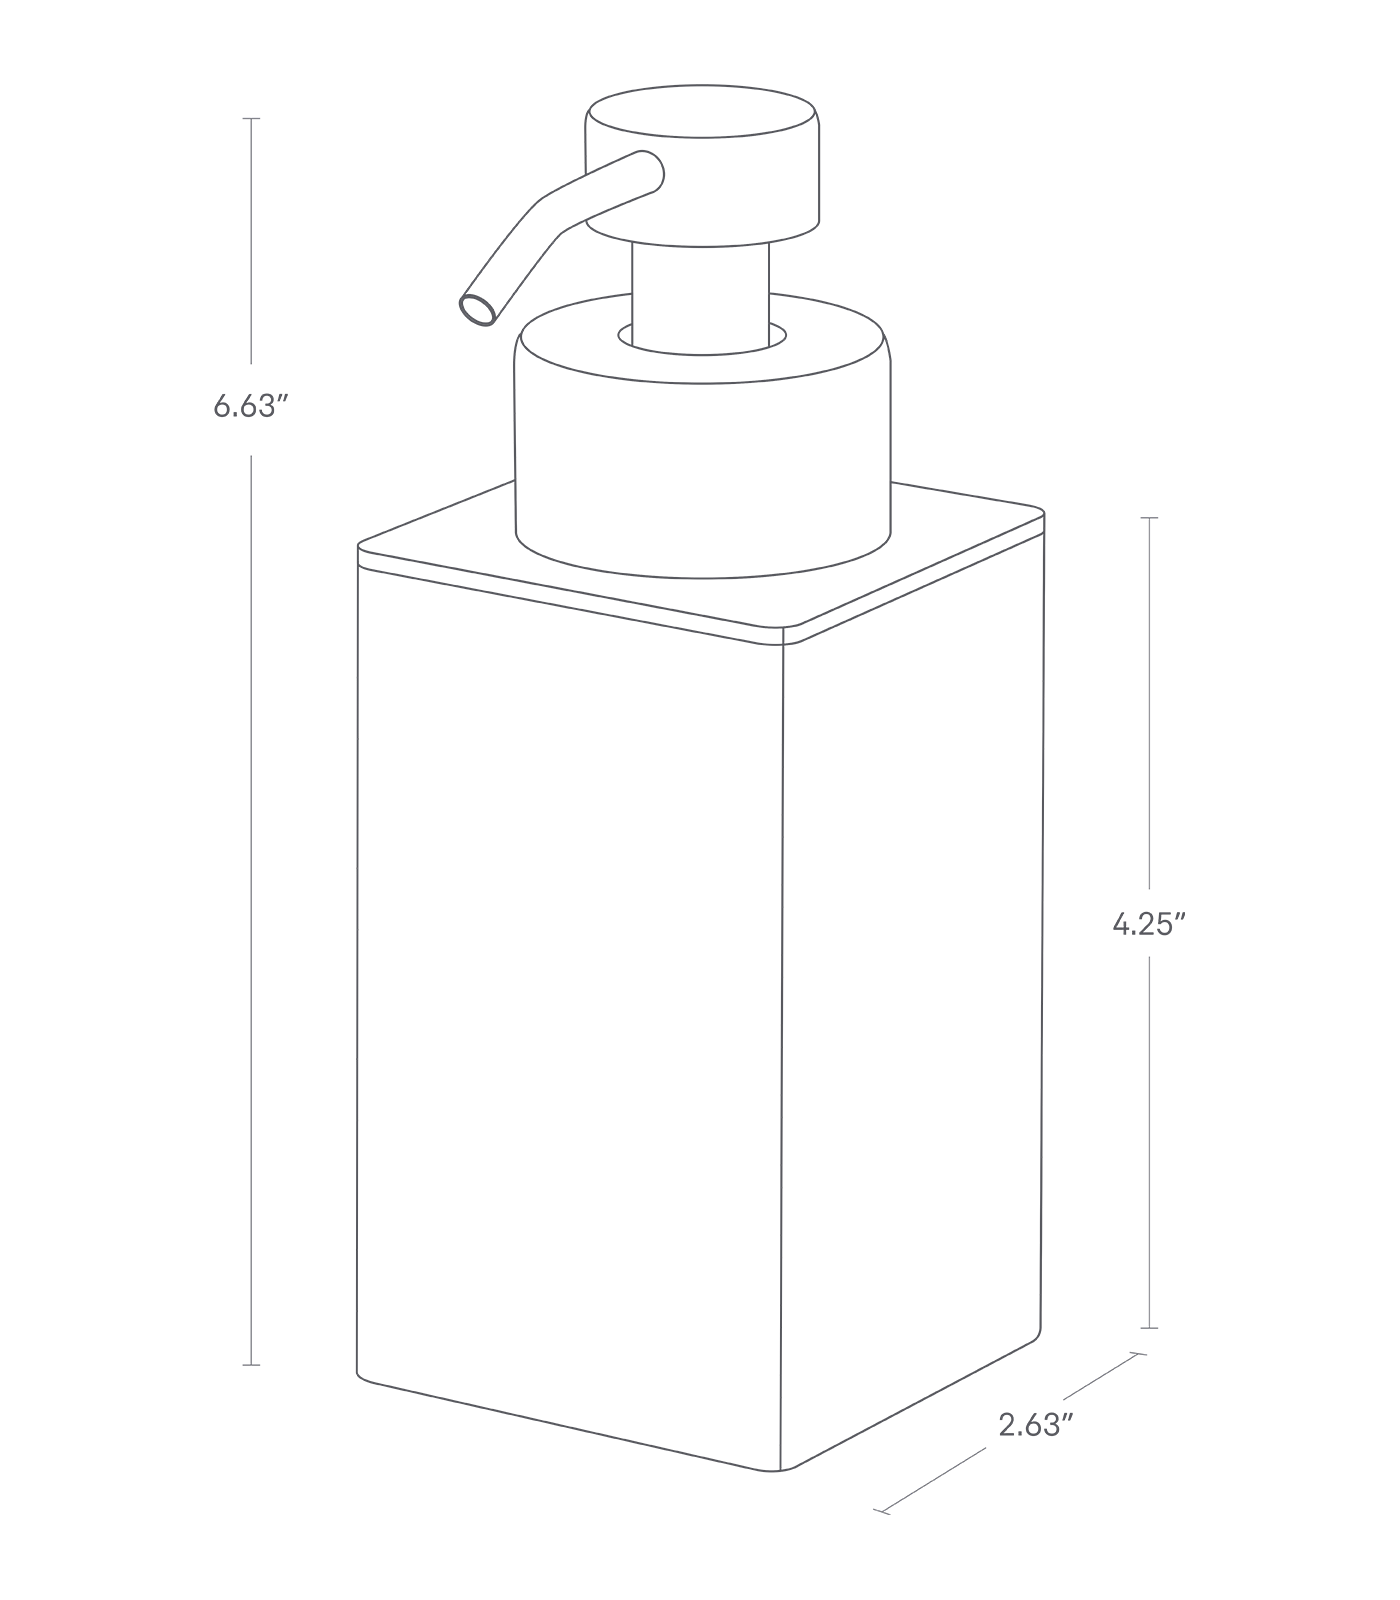 Dimension image for Foaming Soap Dispenser on a white background including dimensions  L 3.74 x W 2.76 x H 6.69 inches